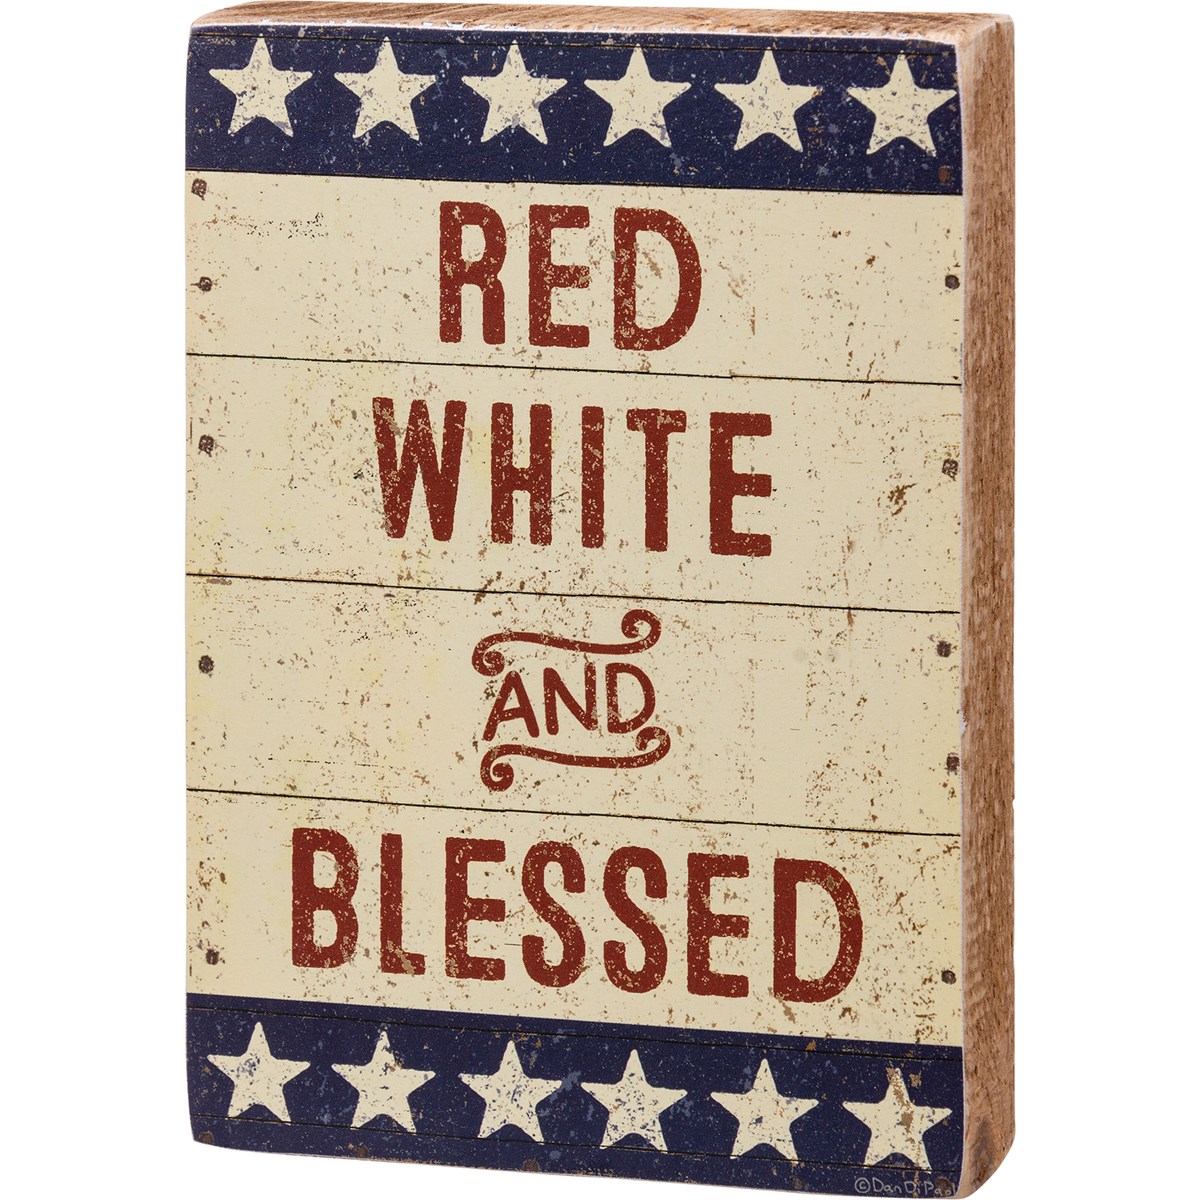 Red White And Blessed Block Sign - Wood, Paper